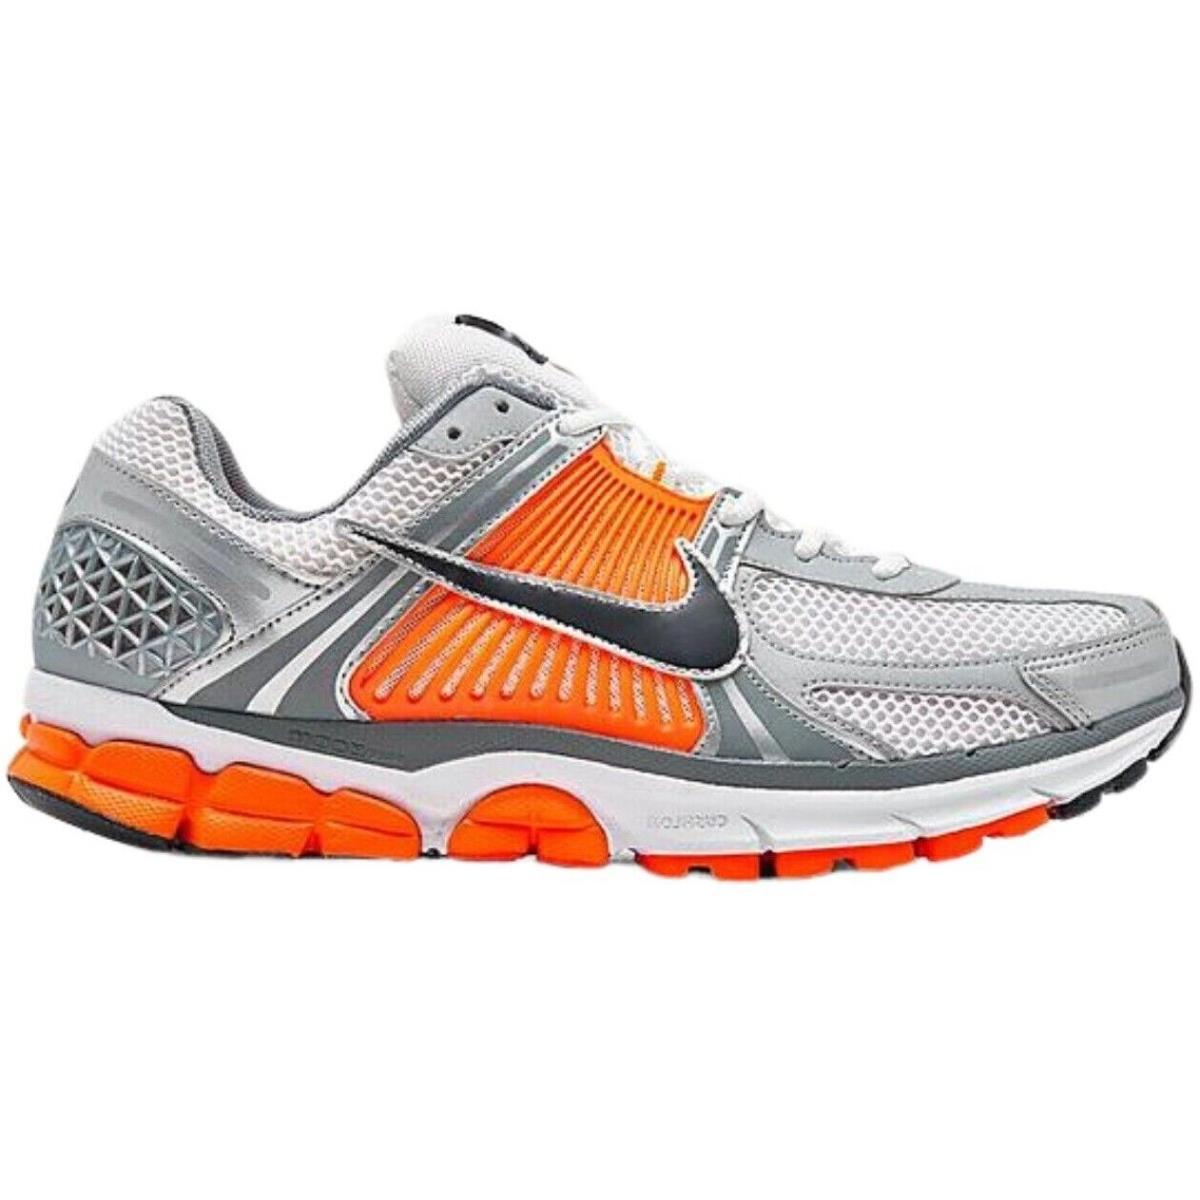 Nike Zoom Vomero 5 Men`s Casual Shoes All Colors US Sizes 7-14 Platinum Tint / Dark Obsidian / Cool Grey